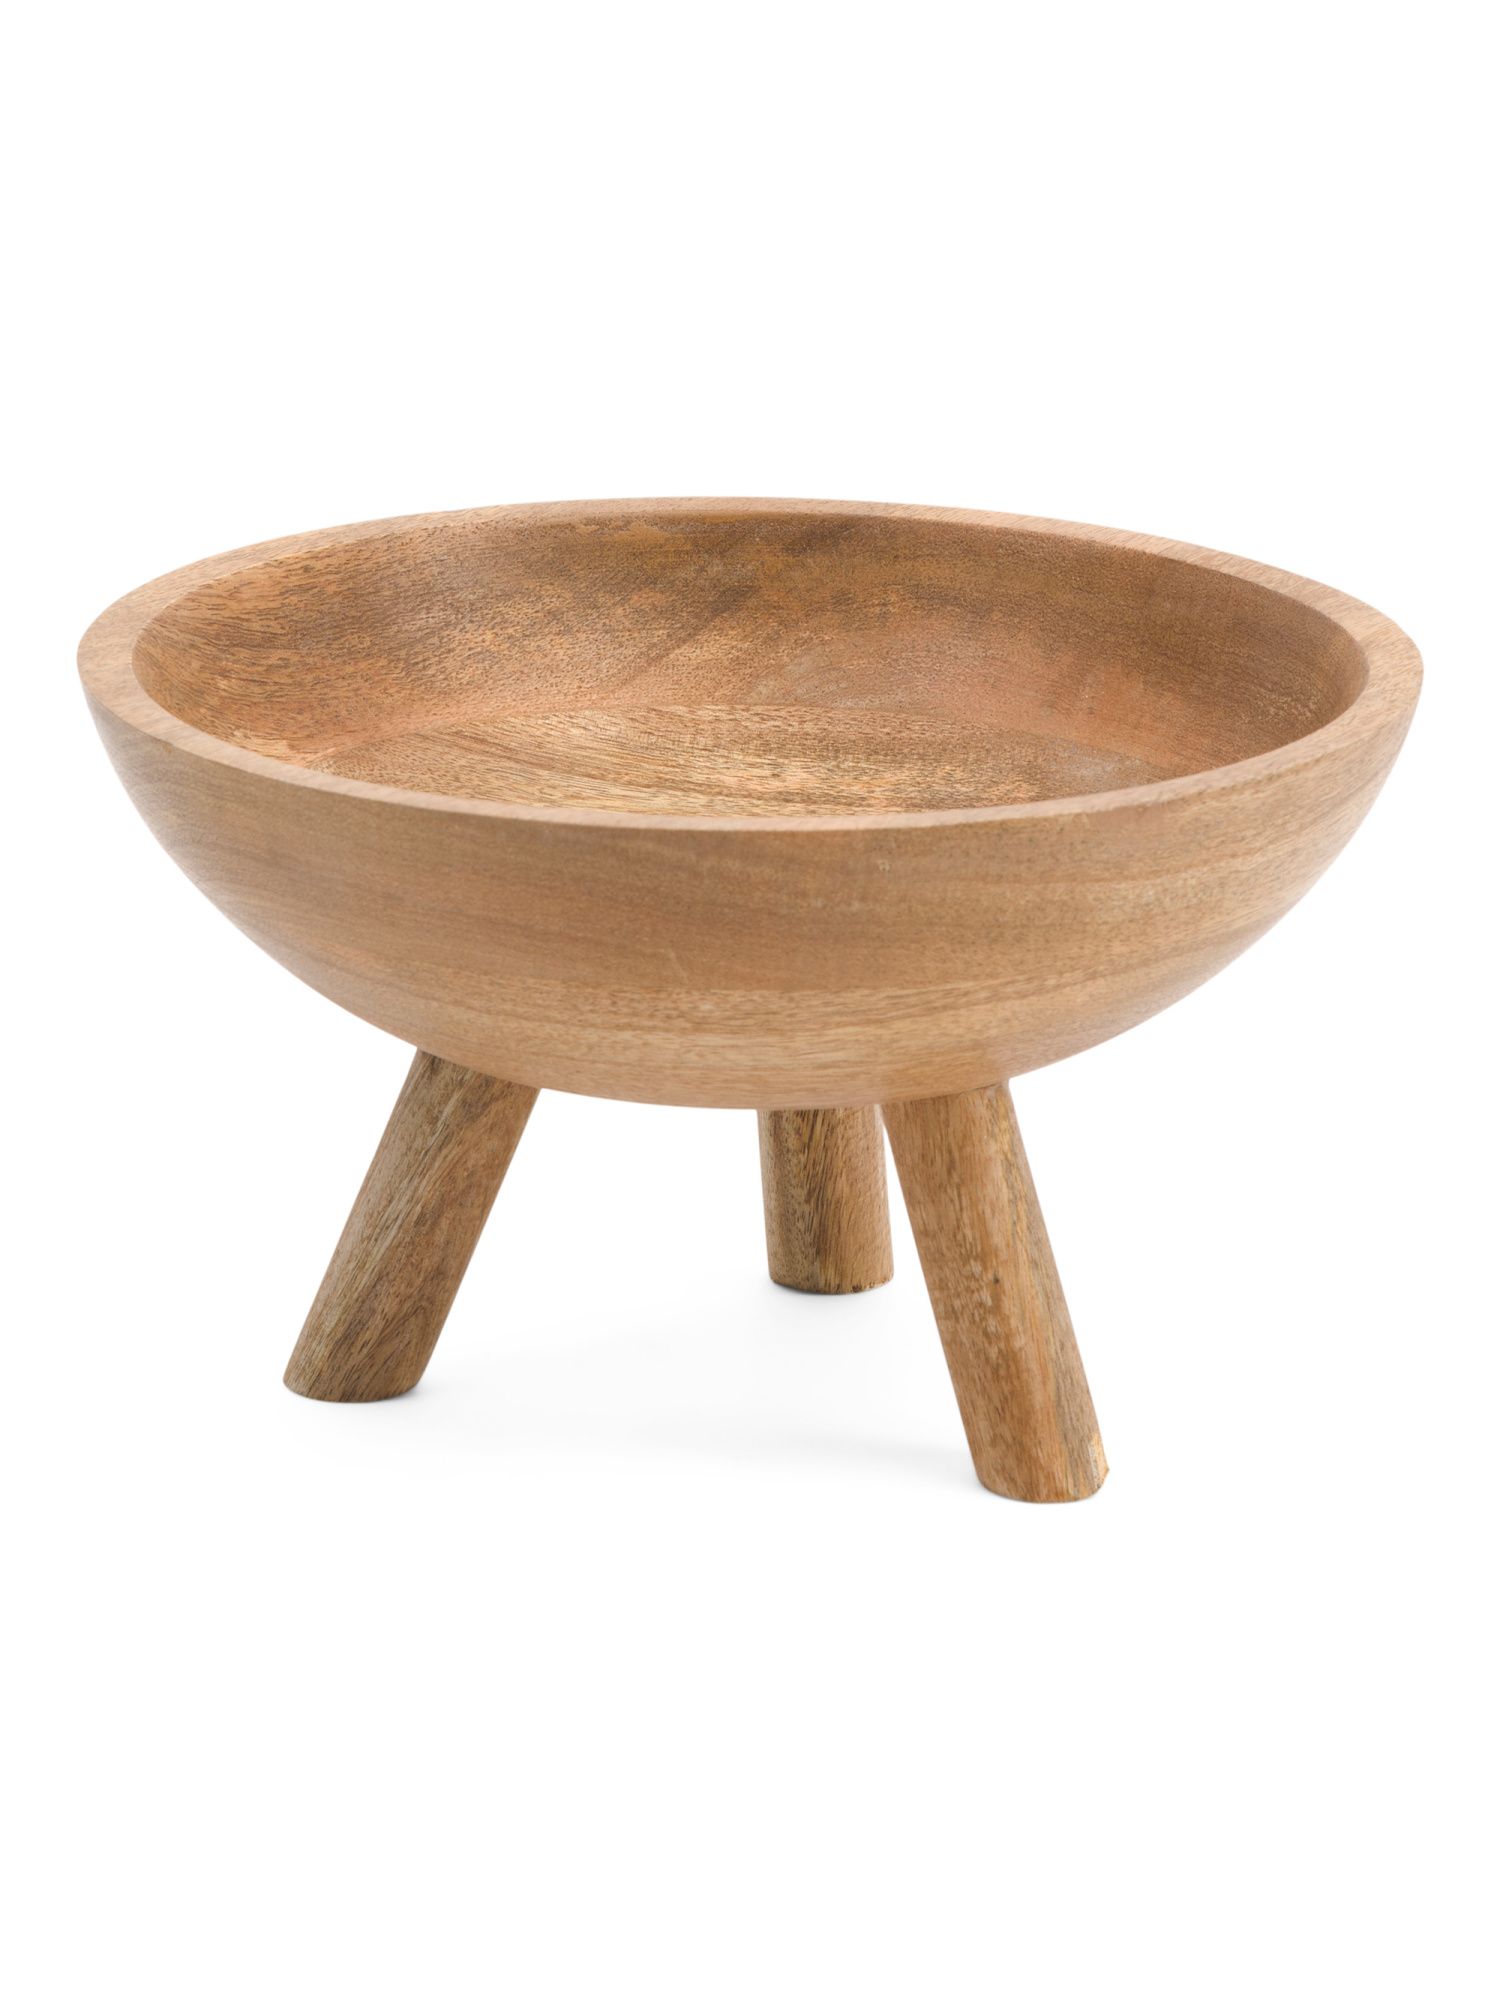 10in Wooden Bowl With Legs | TJ Maxx